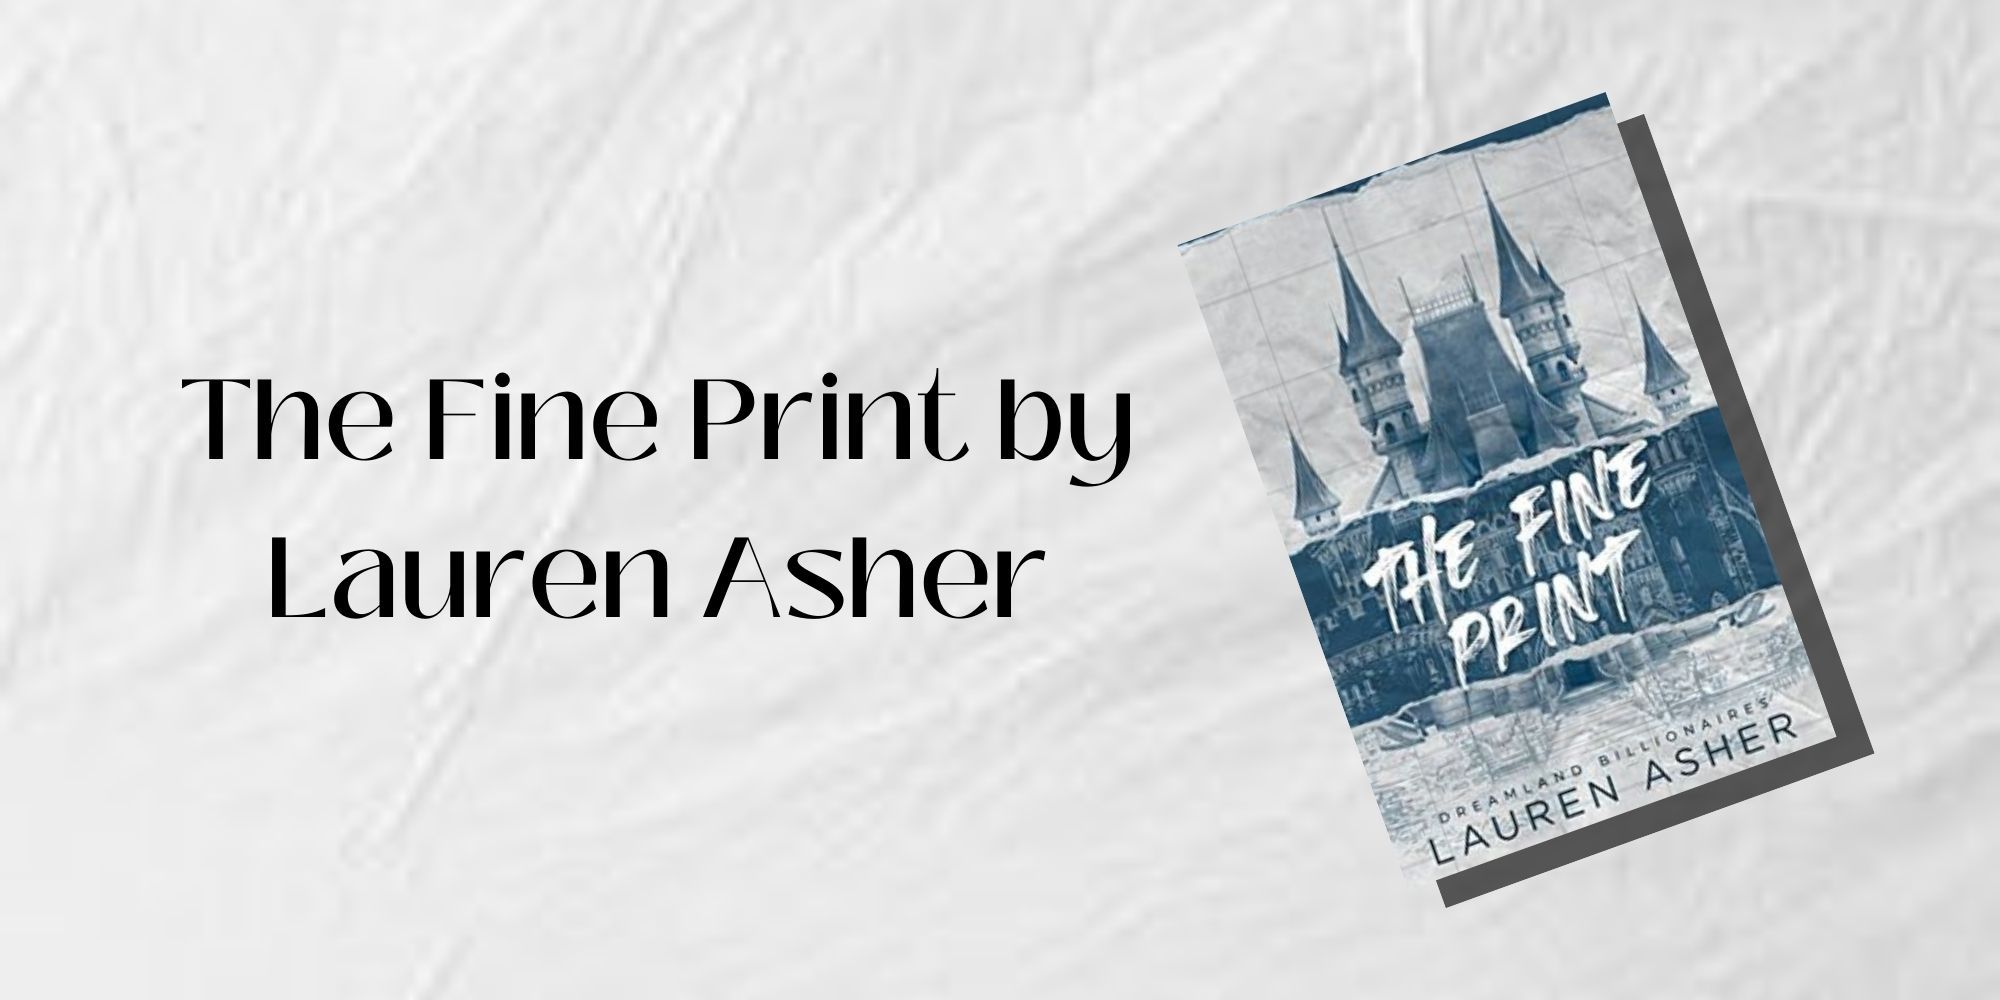 The cover of The Fine Print by Lauren Asher